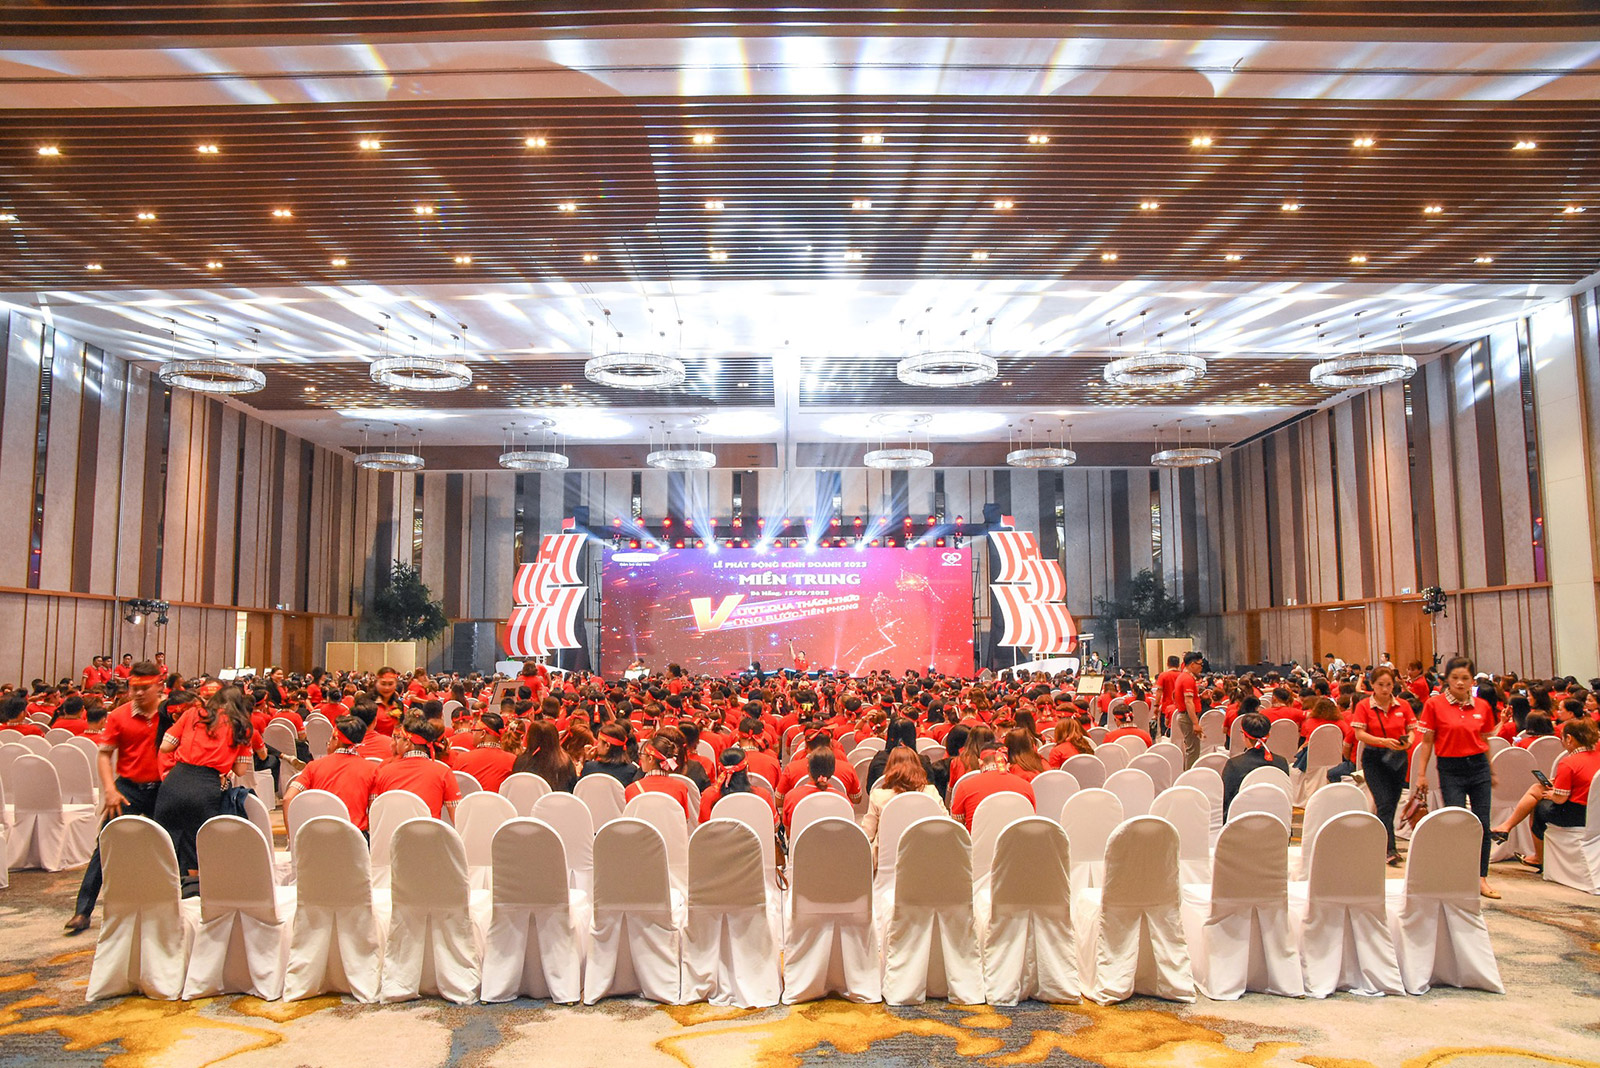 WELCOME MORE THAN 2000 GUESTS WITH 2 BIG EVENTS AT ARIYANA CONVENTION CENTRE DANANG